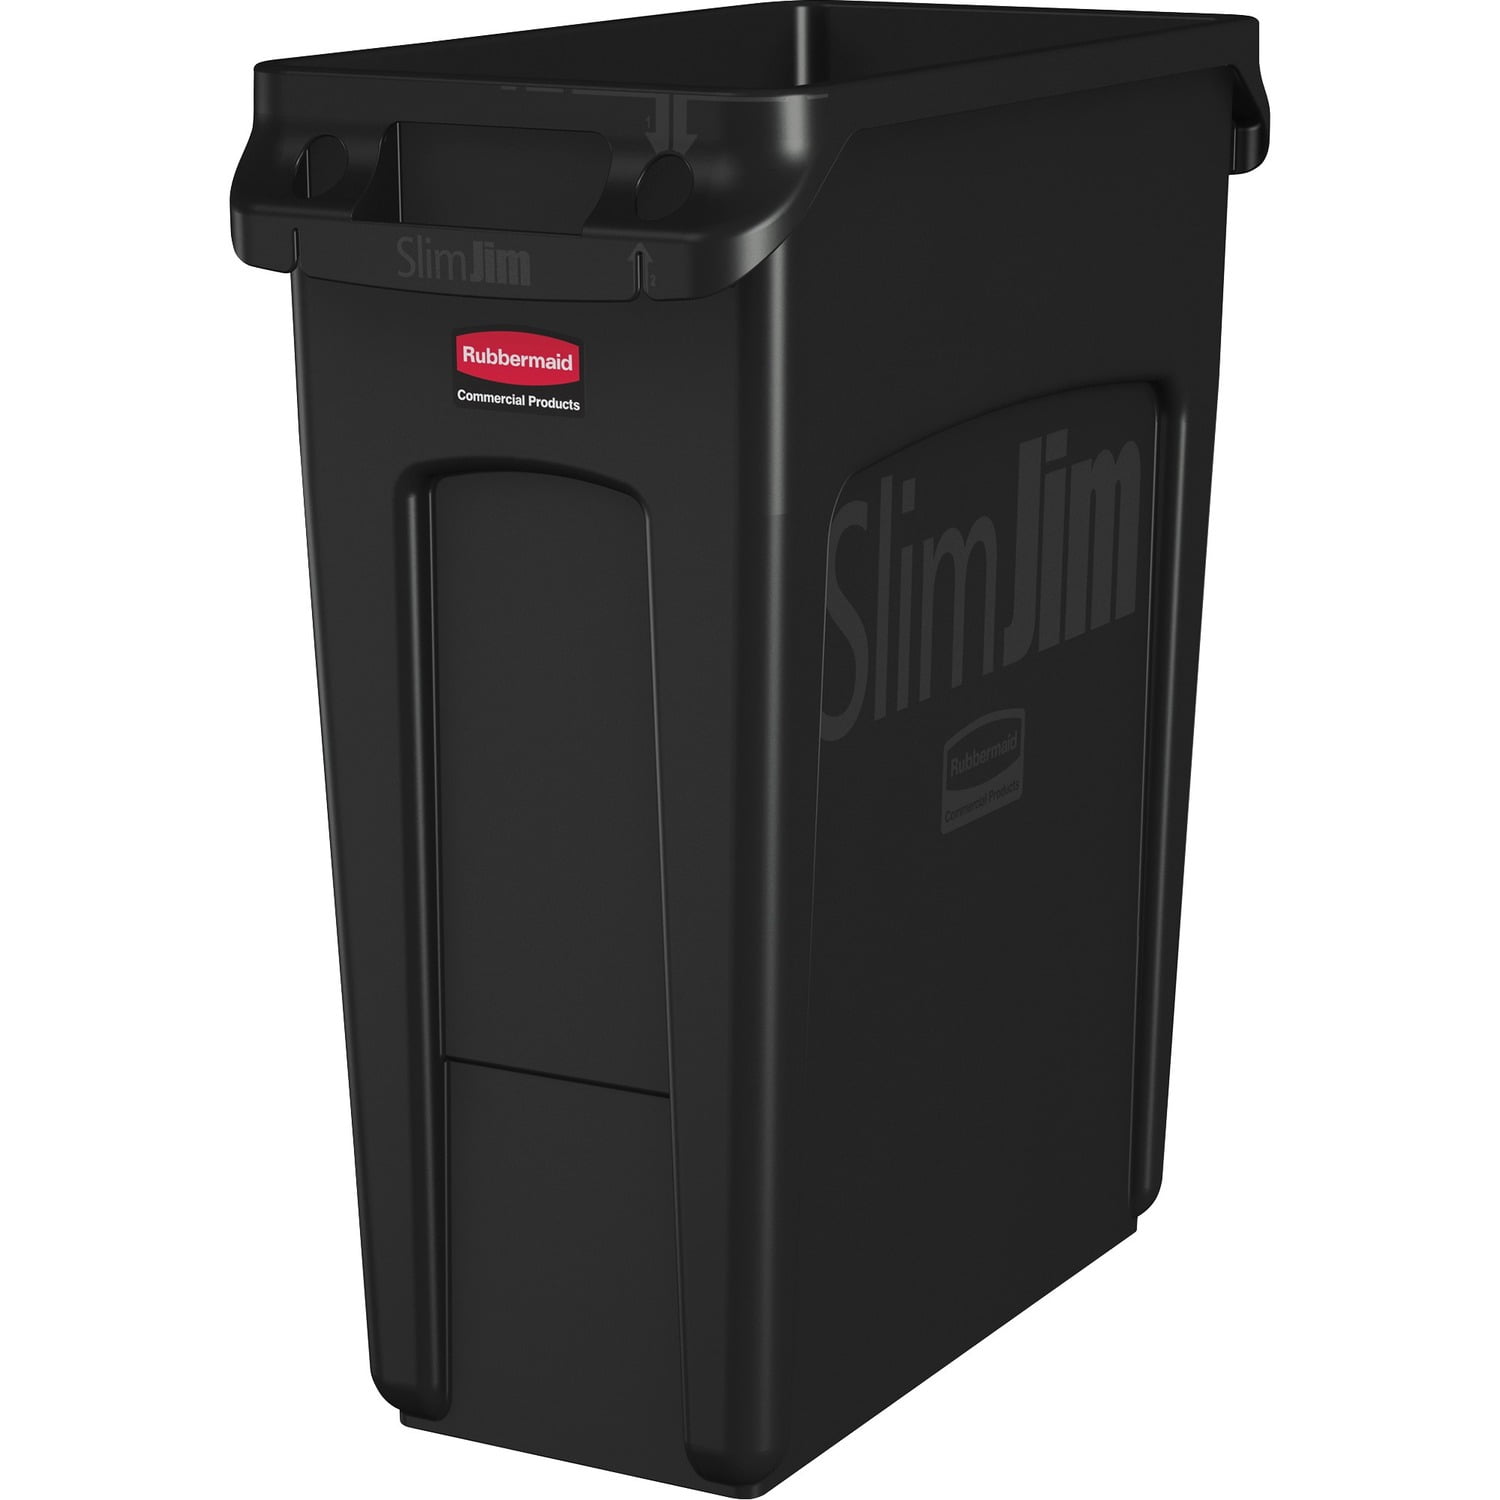 16 Gallon Skinny Plastic Home & Office Trash Can or Recycling Bin (4 Colors)